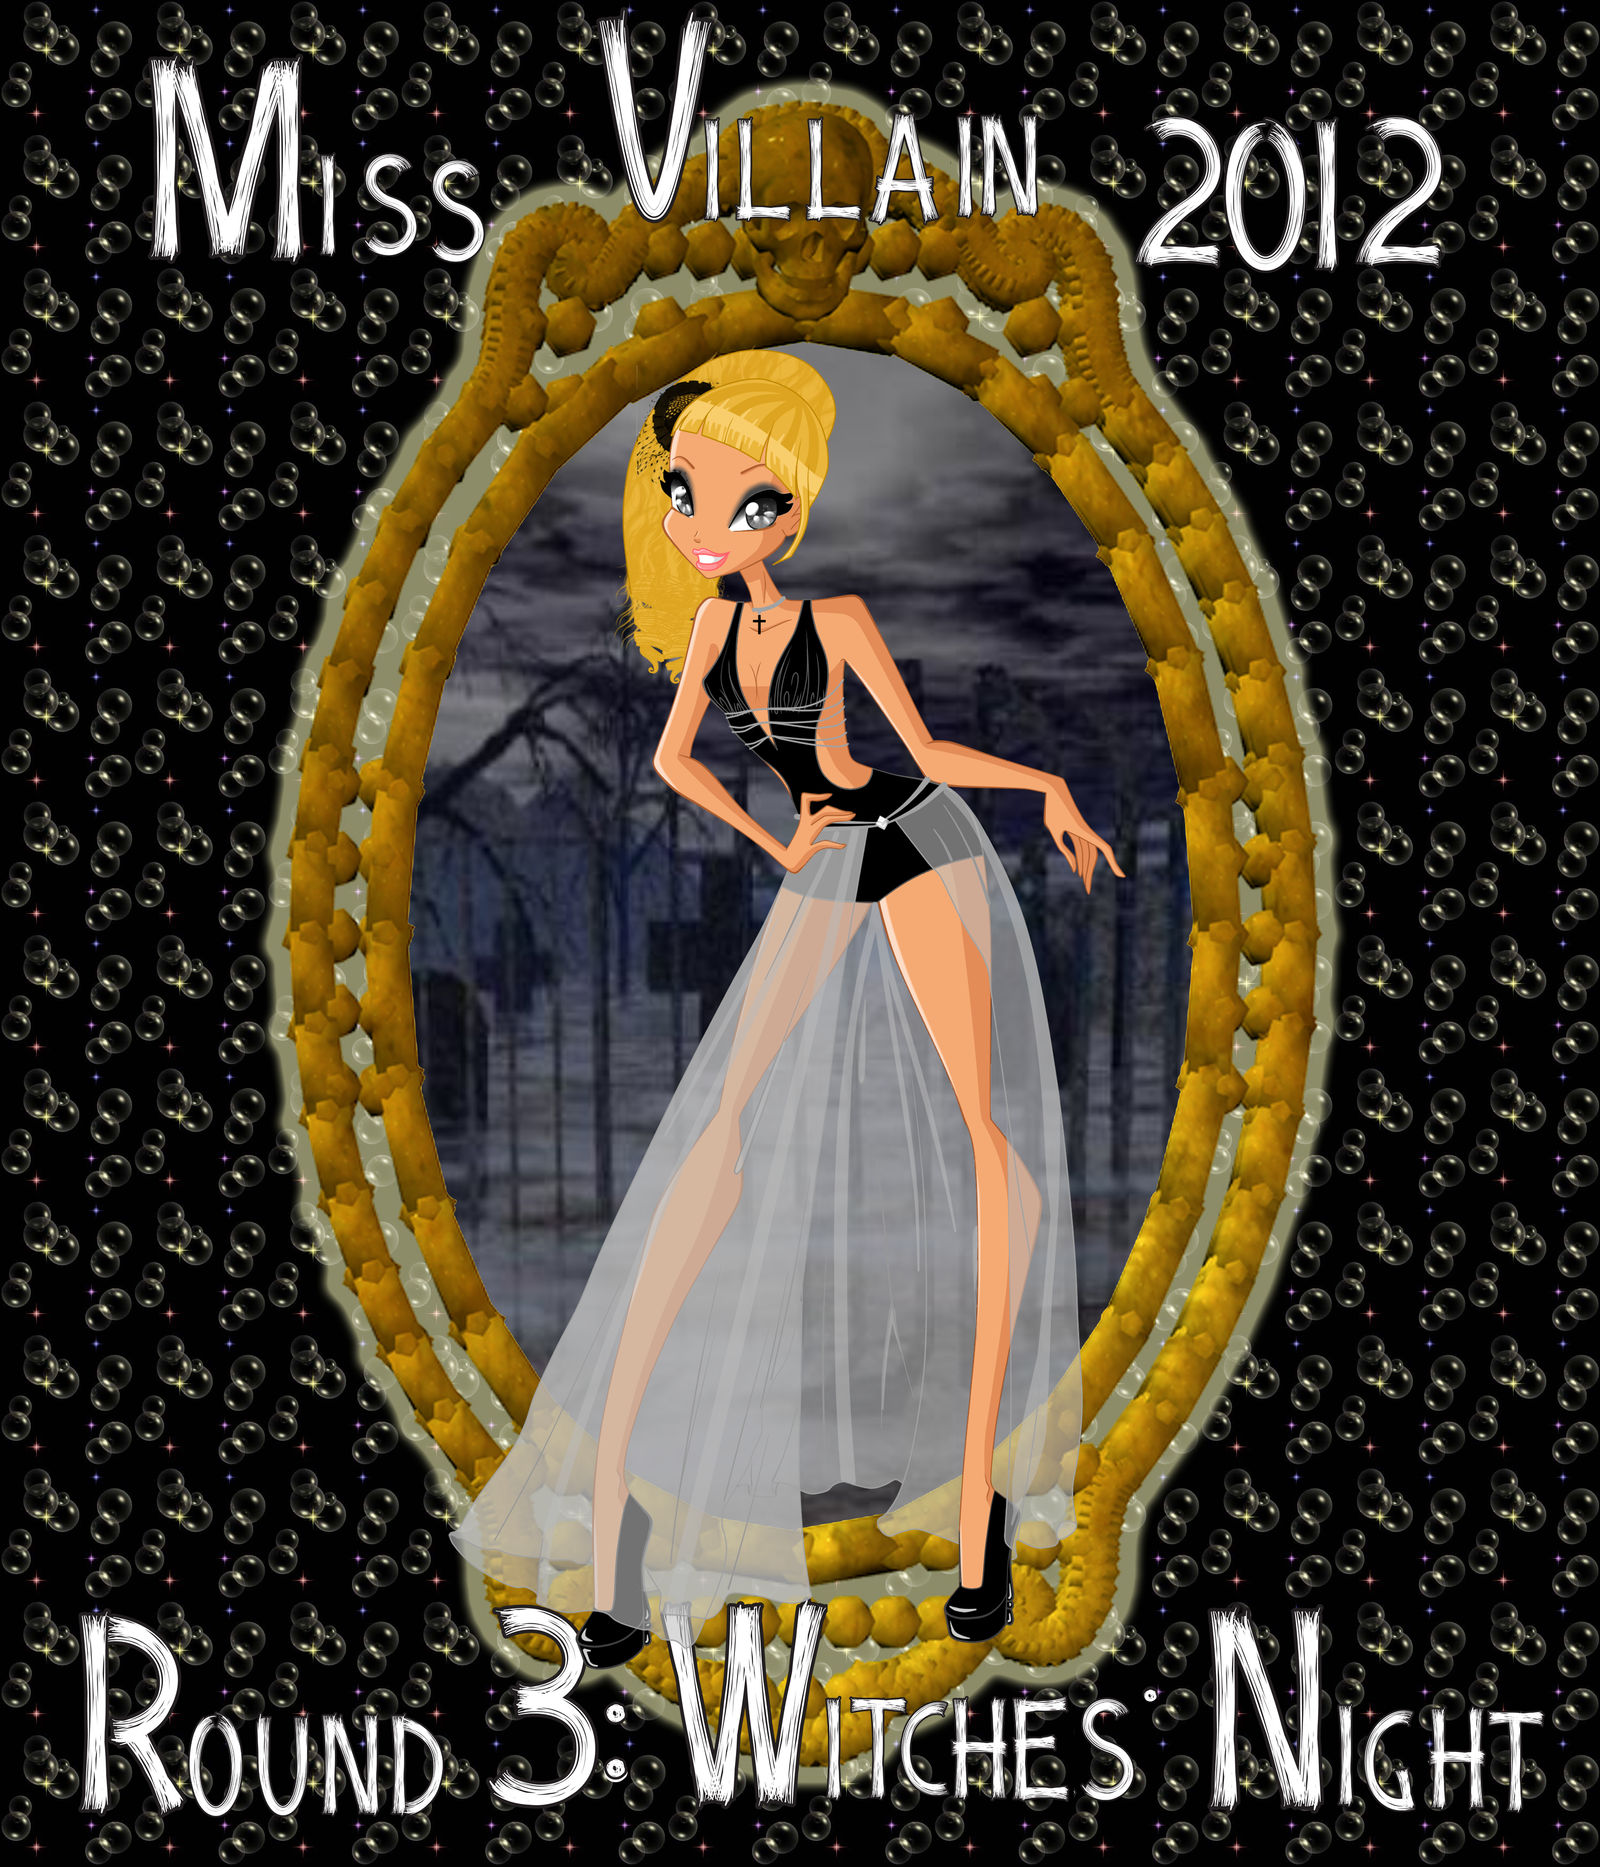 Miss Villain 2012 Round 3: Candace Witch's Night